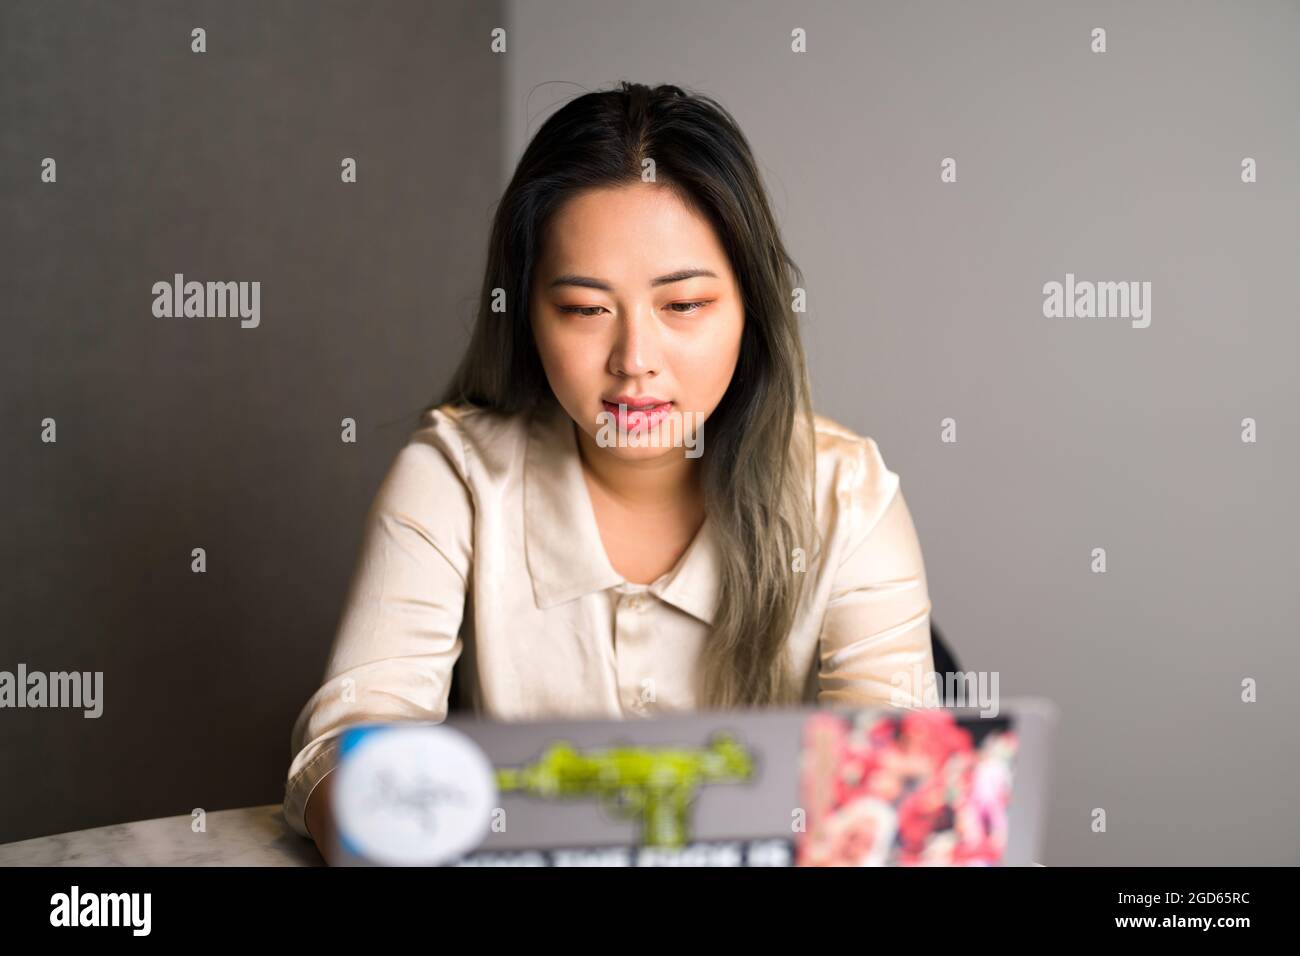 Young Edgy Asian Data Scientist on a Video Conference Stock Photo